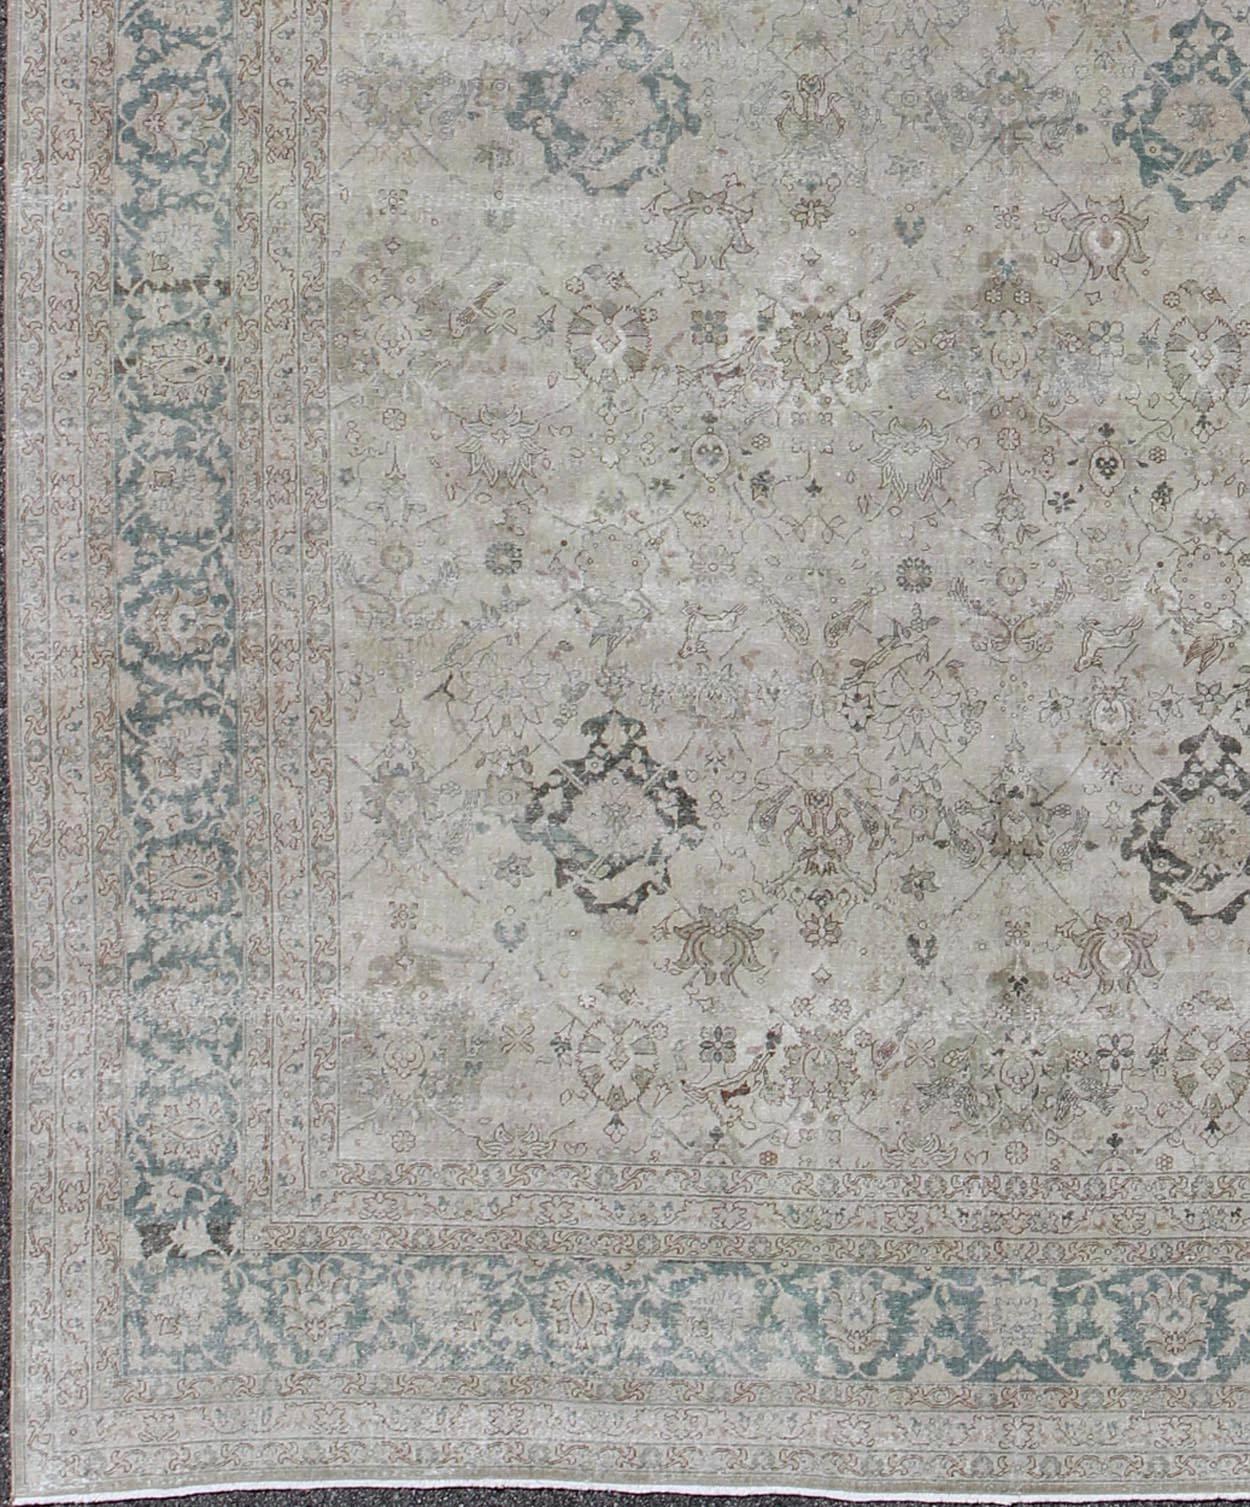 All-over design antique turkish sivas rug in gray, ivory, and blue tones, rug sus-1803-166, country of origin / type: Turkey / Sivas, circa 1910

Stylized all-over motifs are featured in a pattern on this antique Sivas wool rug. A blend of Persian